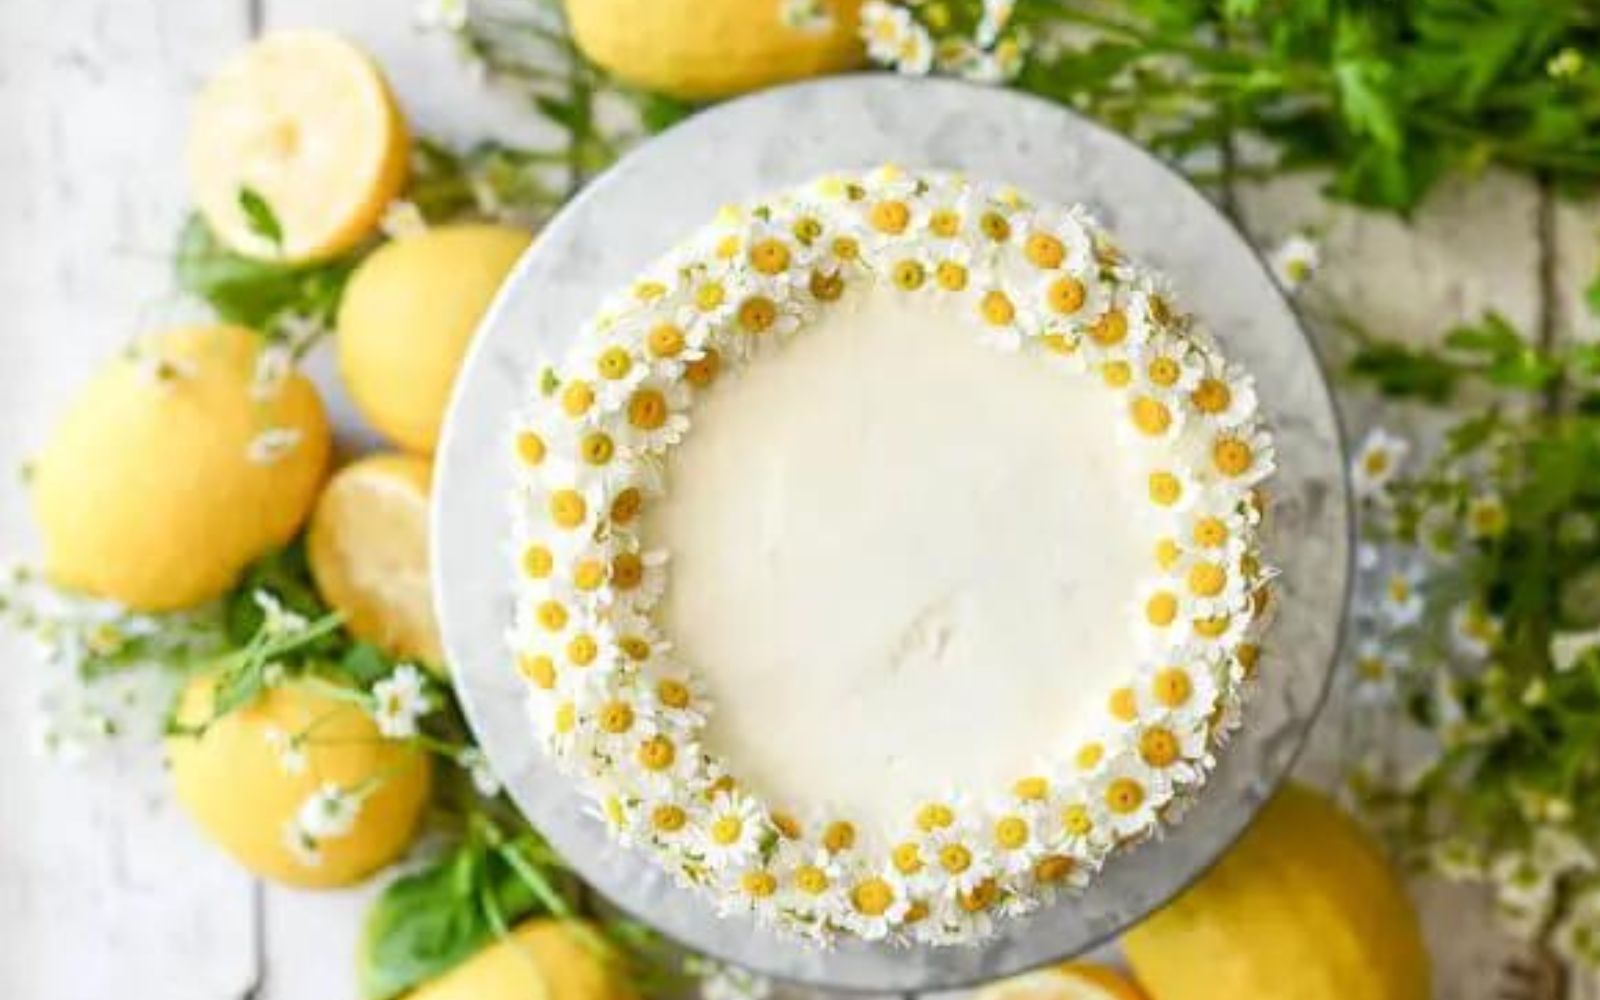 white frosted cake garnished with chamomile blossoms